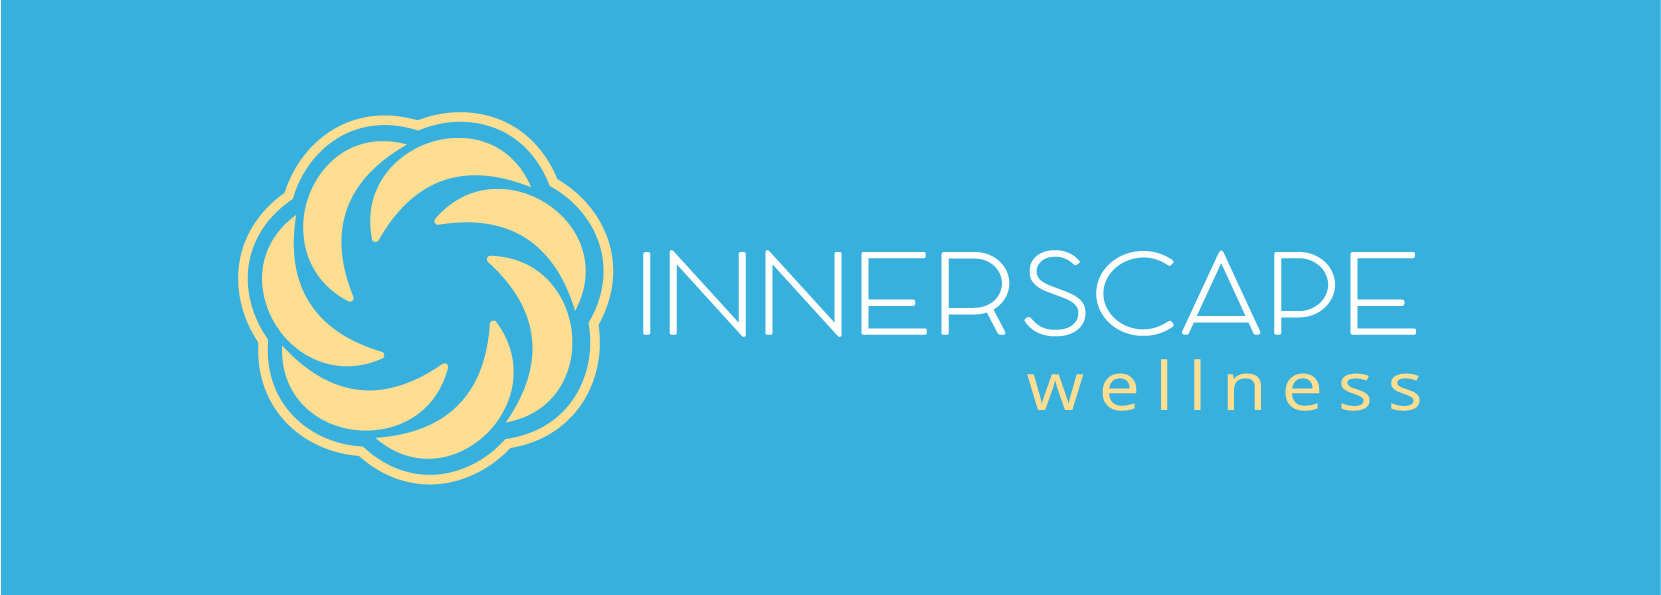 Innerscape Wellness Hypnosis Therapies